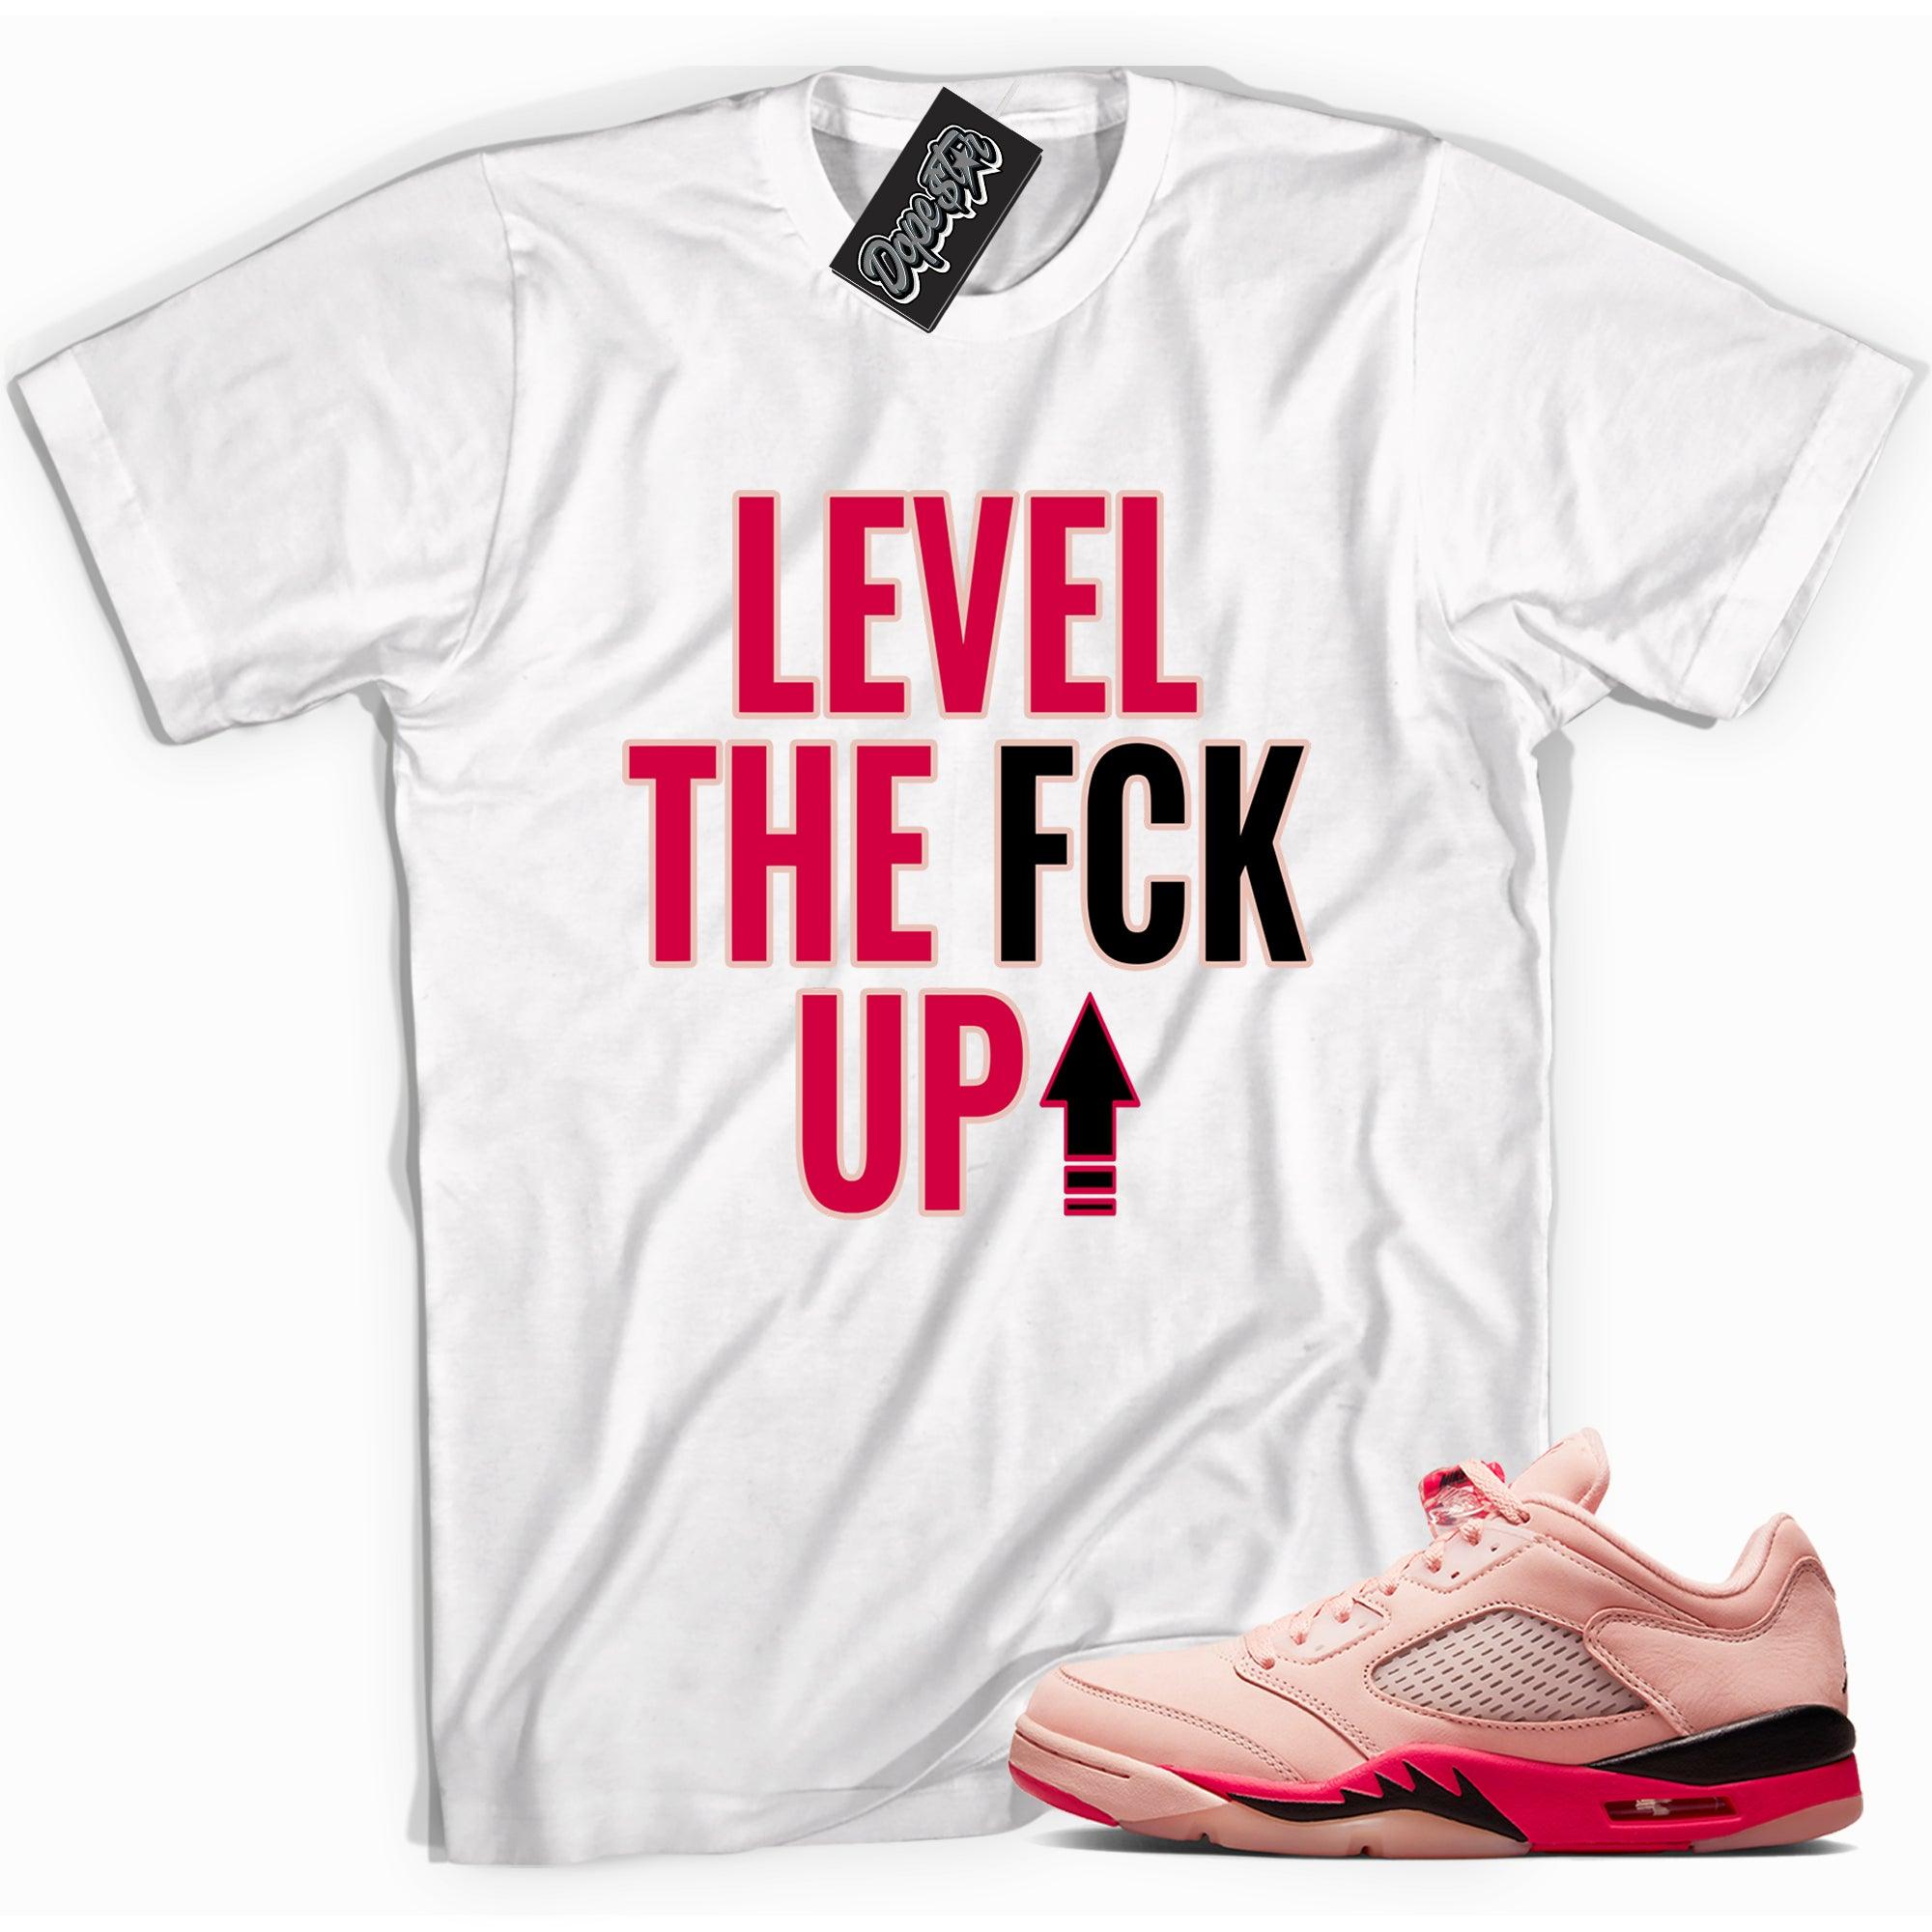 Cool white graphic tee with 'Level Up' print, that perfectly matches Air Jordan 5 Arctic Orange Toe sneakers.